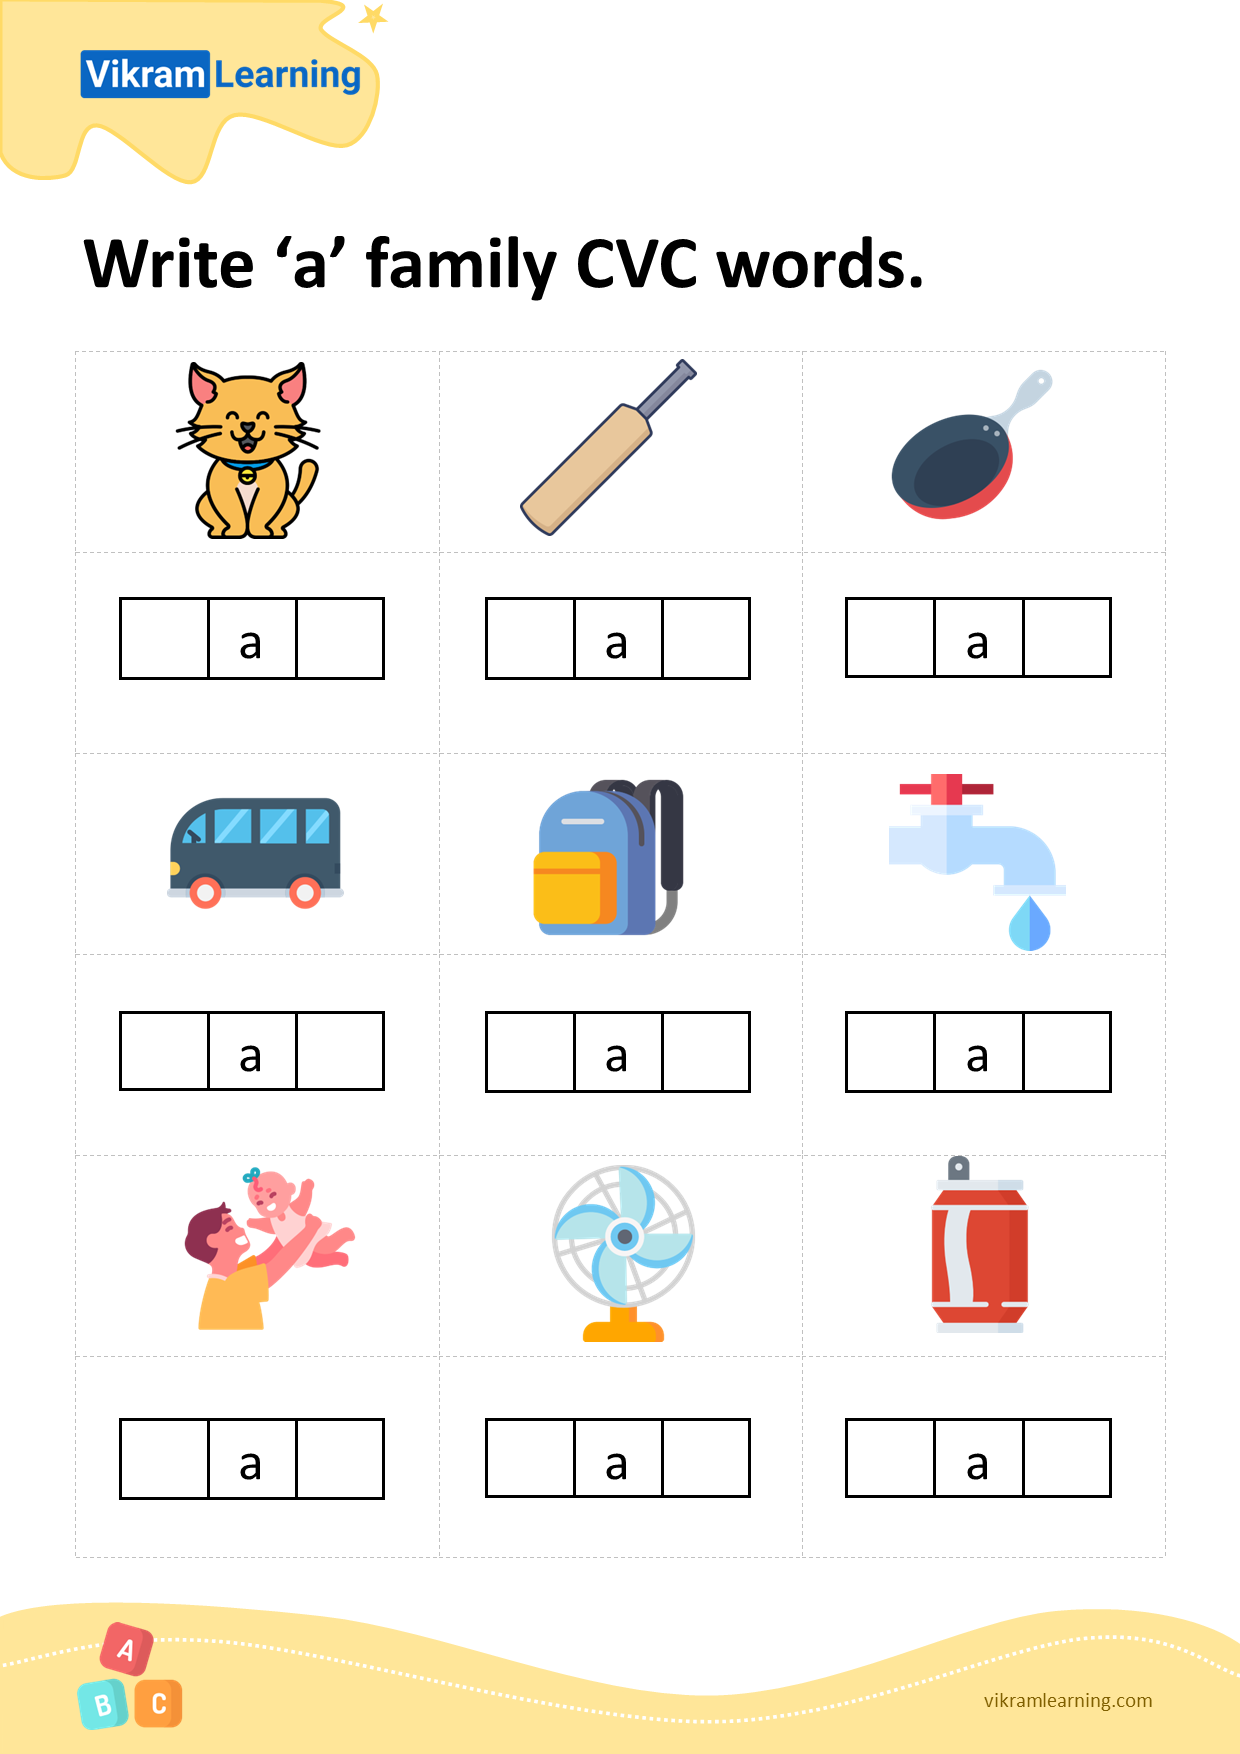 Download write 'a' family cvc words worksheets